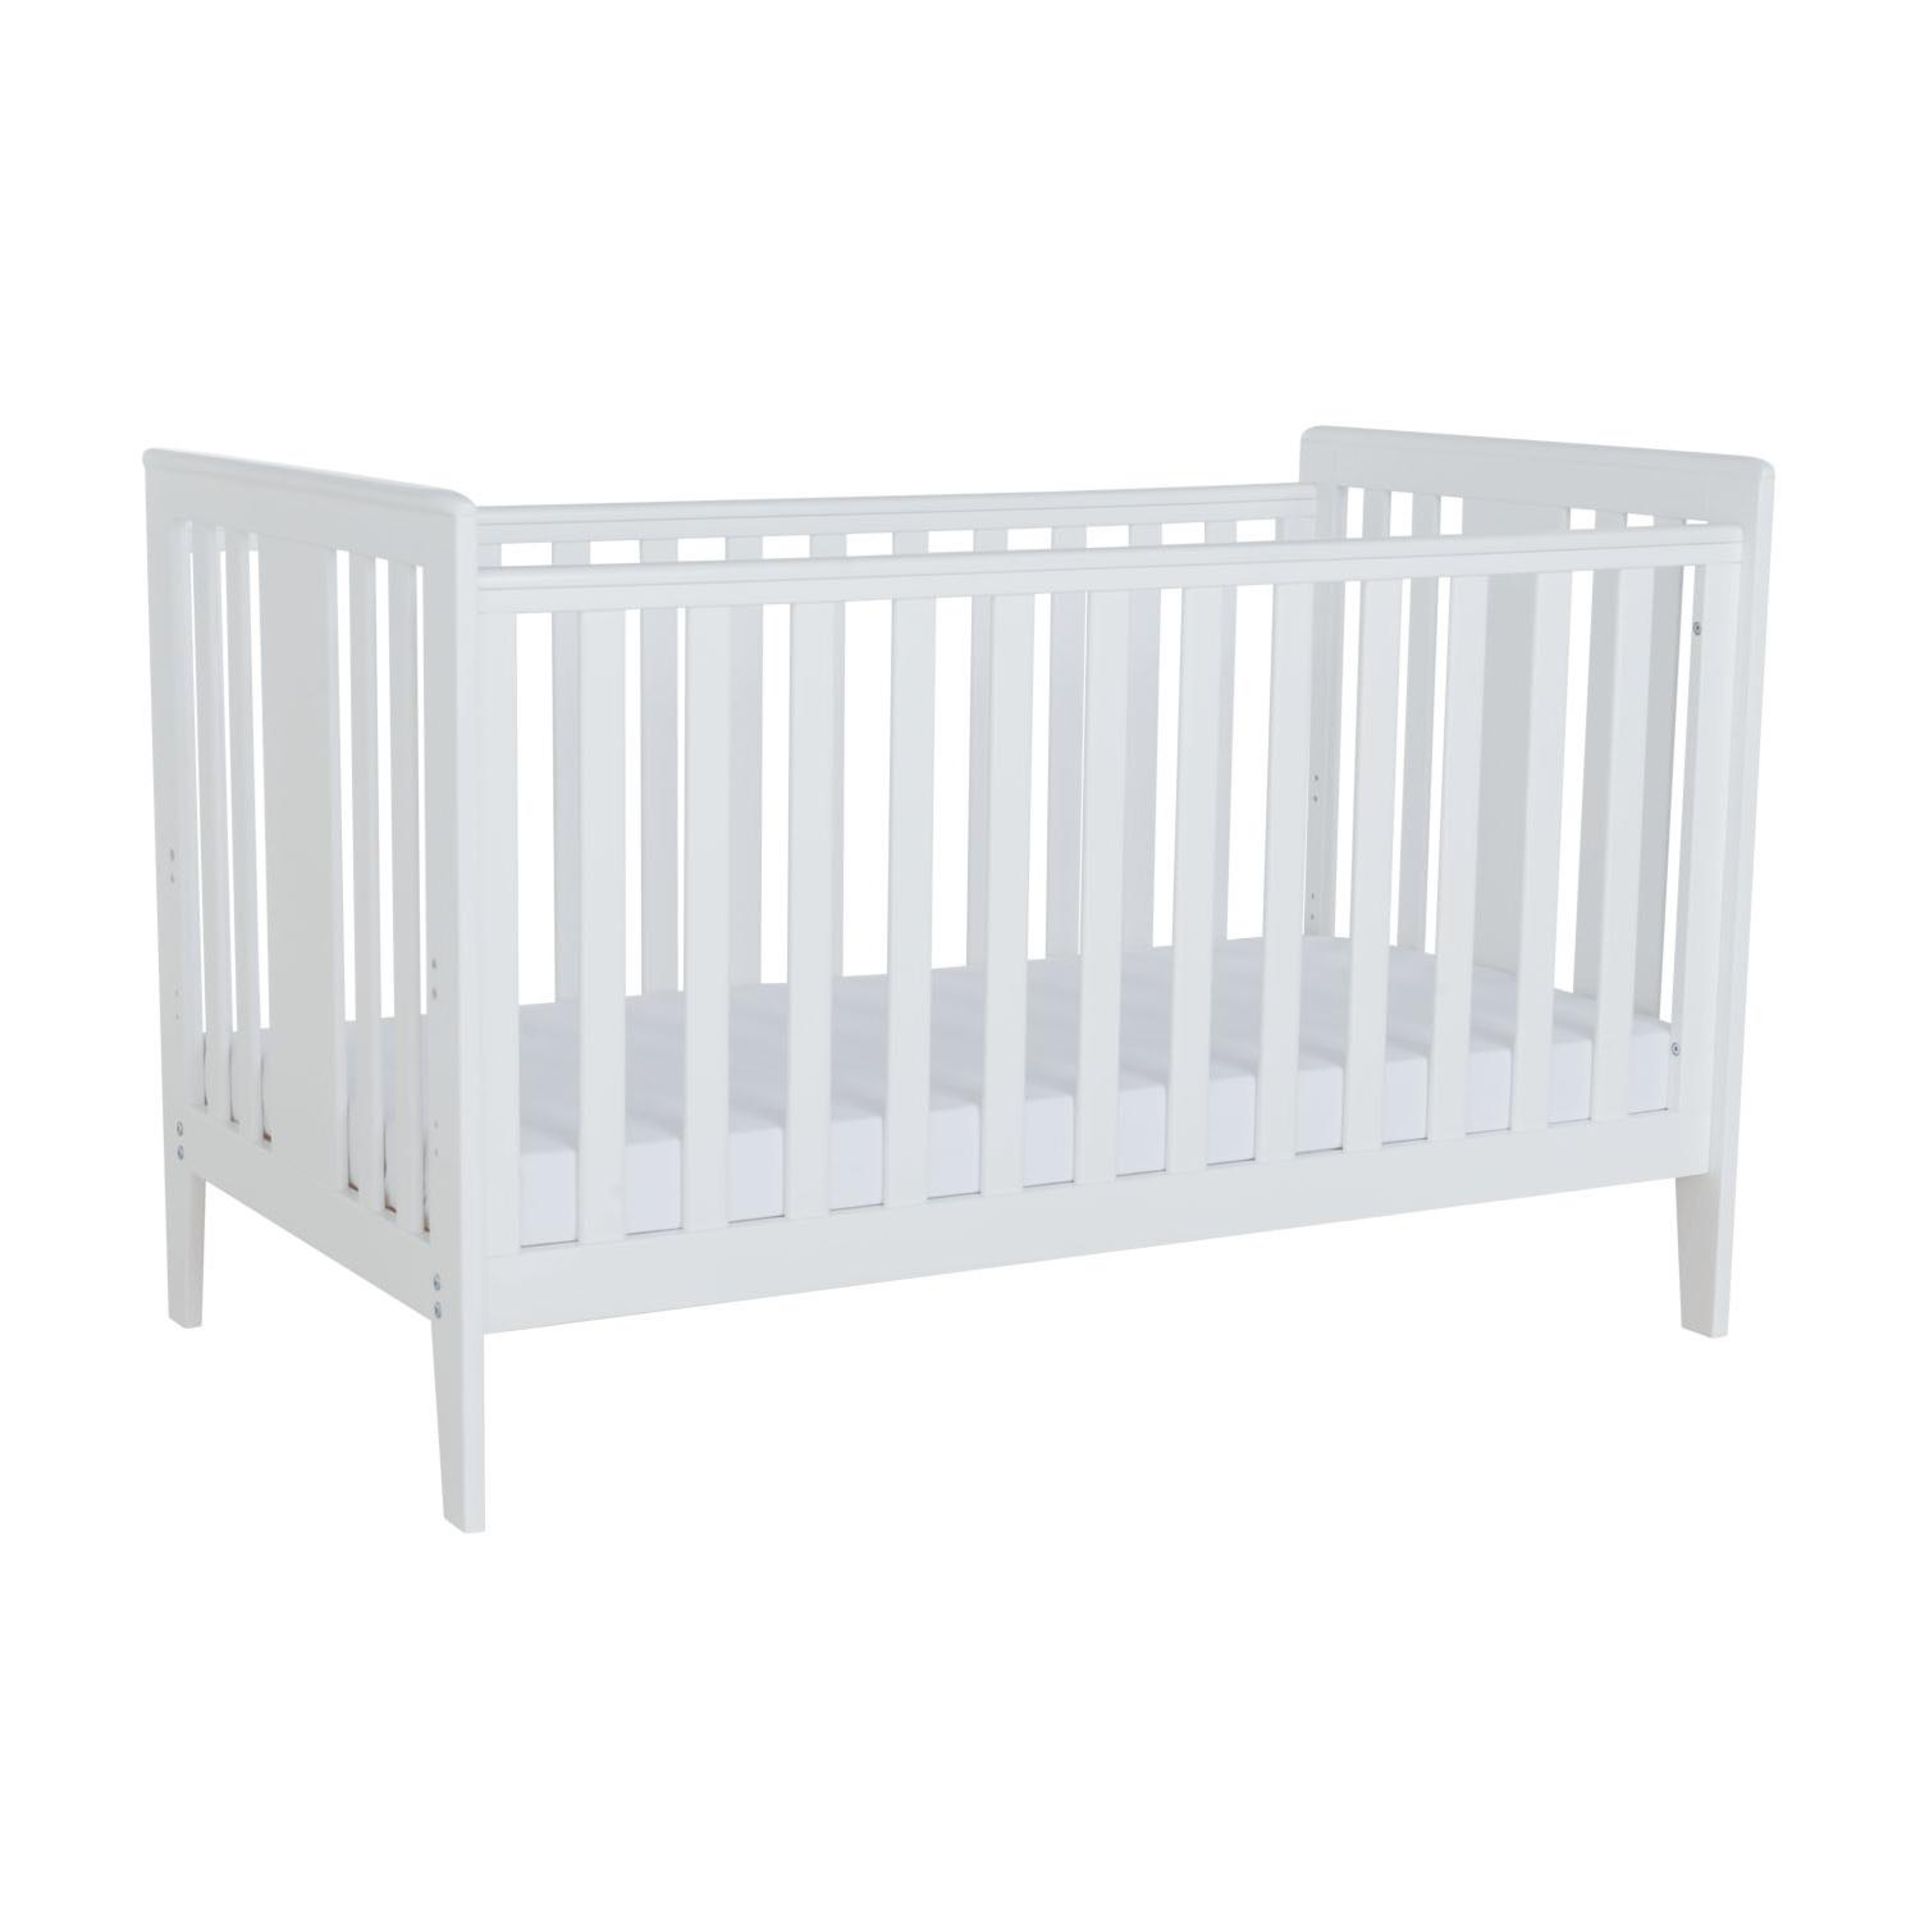 1 x BOXED ISABELLA COT BED IN WHITE *PLEASE NOTE THAT THE BID PRICE IS MULTIPLIED BY THE NUMBER OF